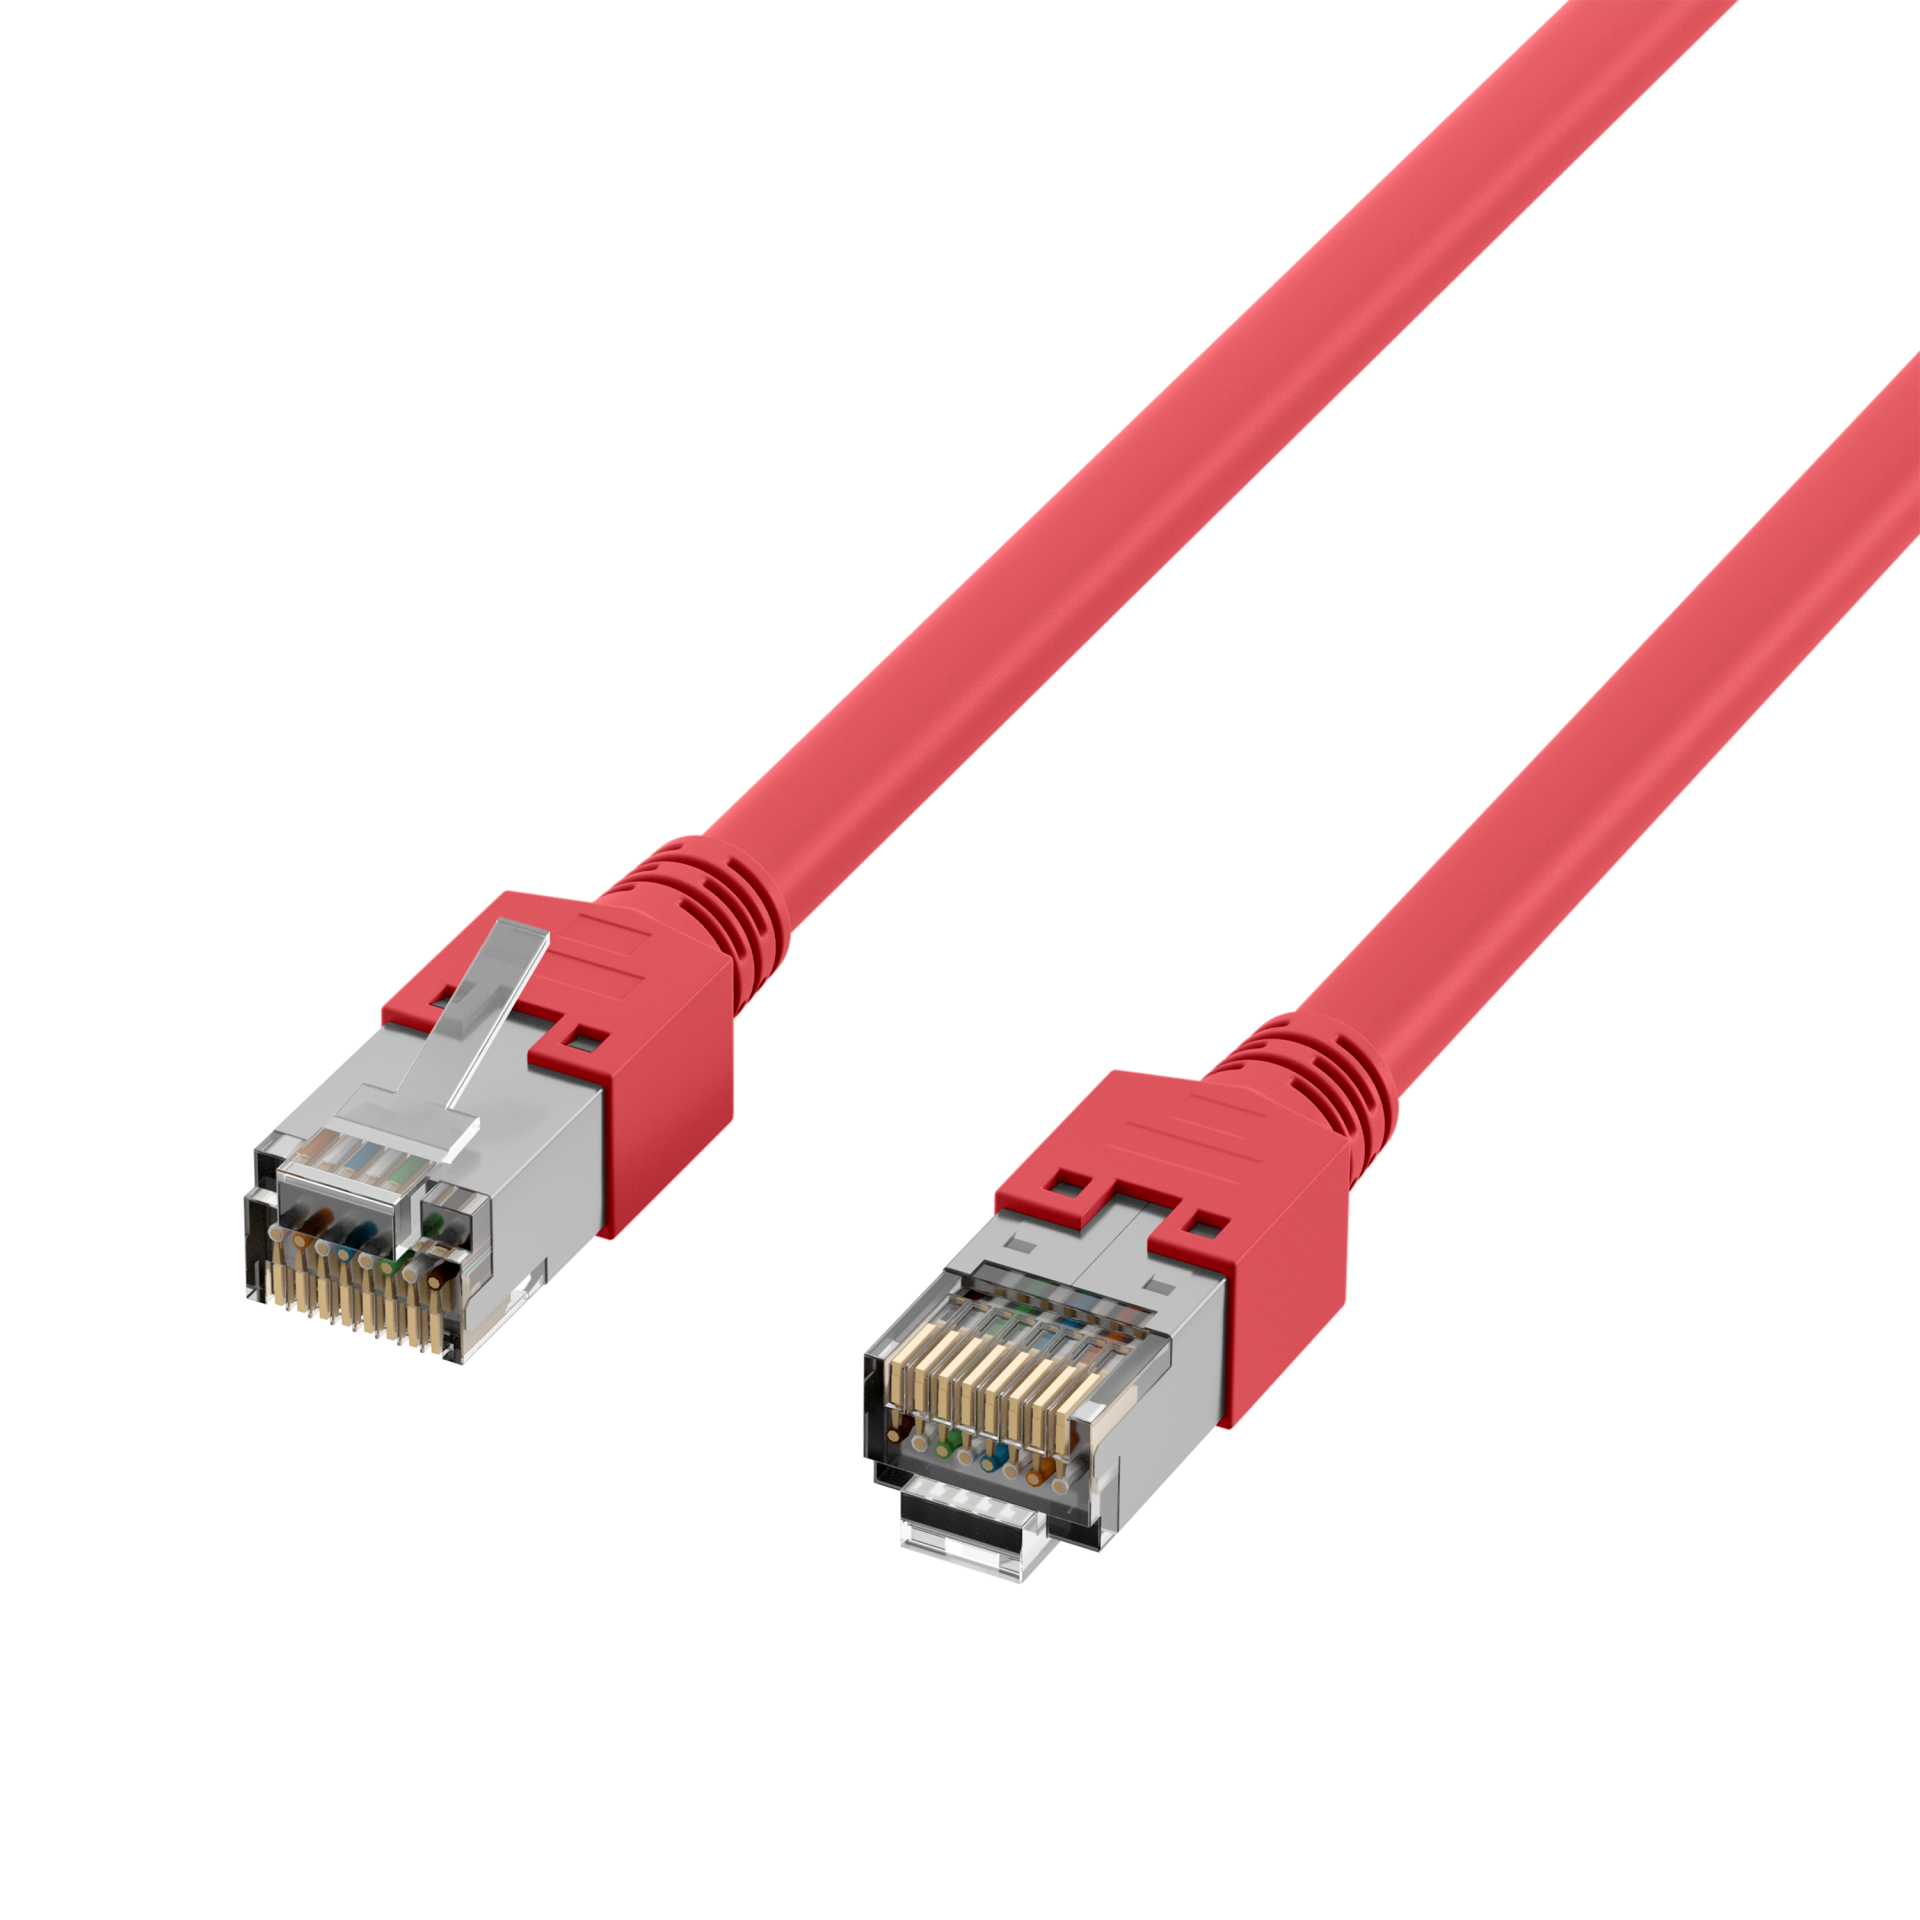 RJ45 Patch Cord Cat.5e S/UTP PVCDätwyler 5502 TM11 red 7,5m